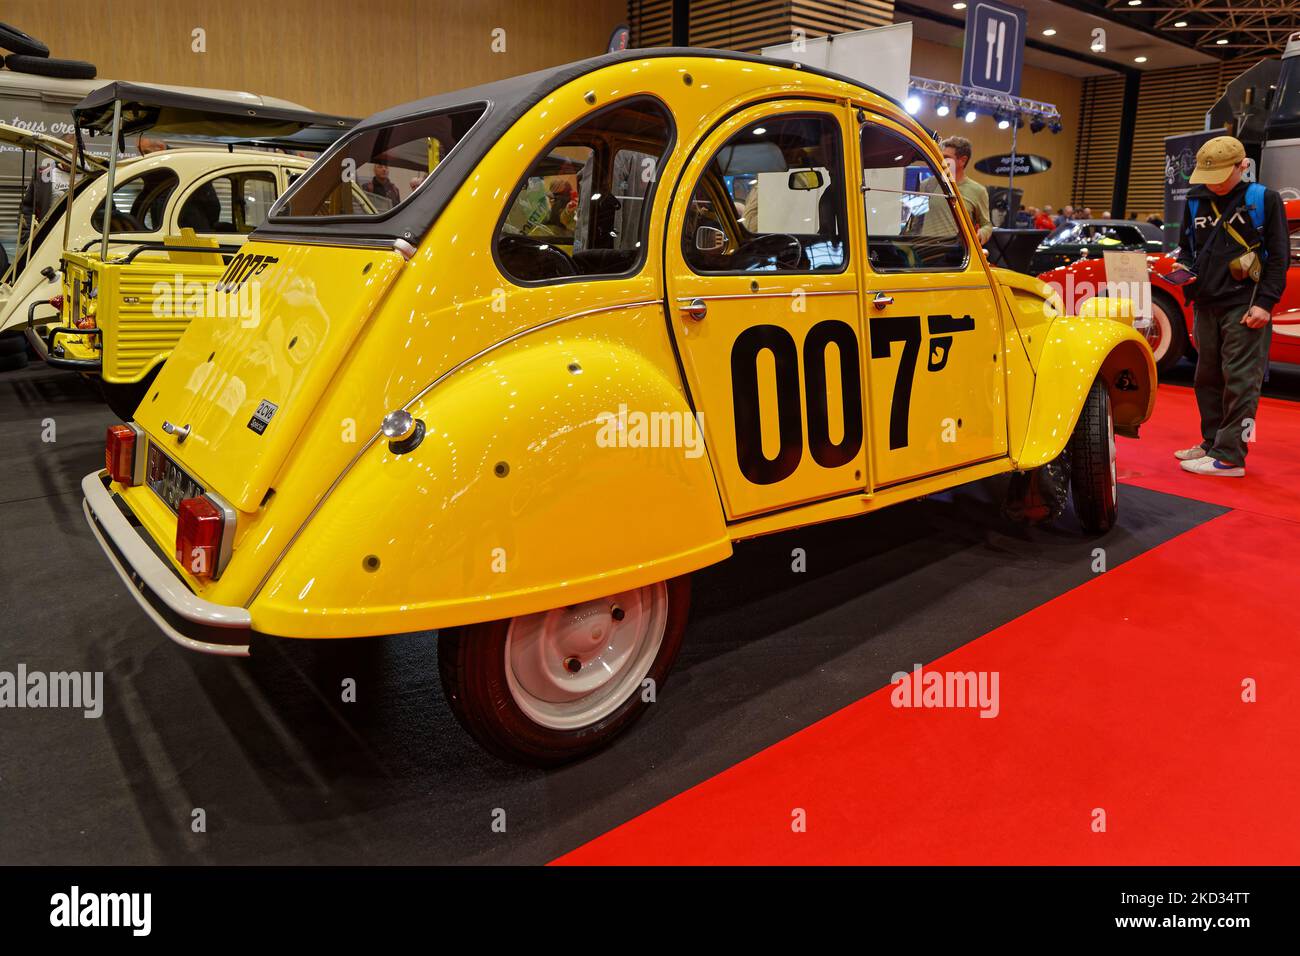 LYON, FRANCE, November 4, 2022 : James Bond's yellow Citroen at the annual Motor Show Epoq'Auto, held at Eurexpo with more than 70000 visitors. Stock Photo